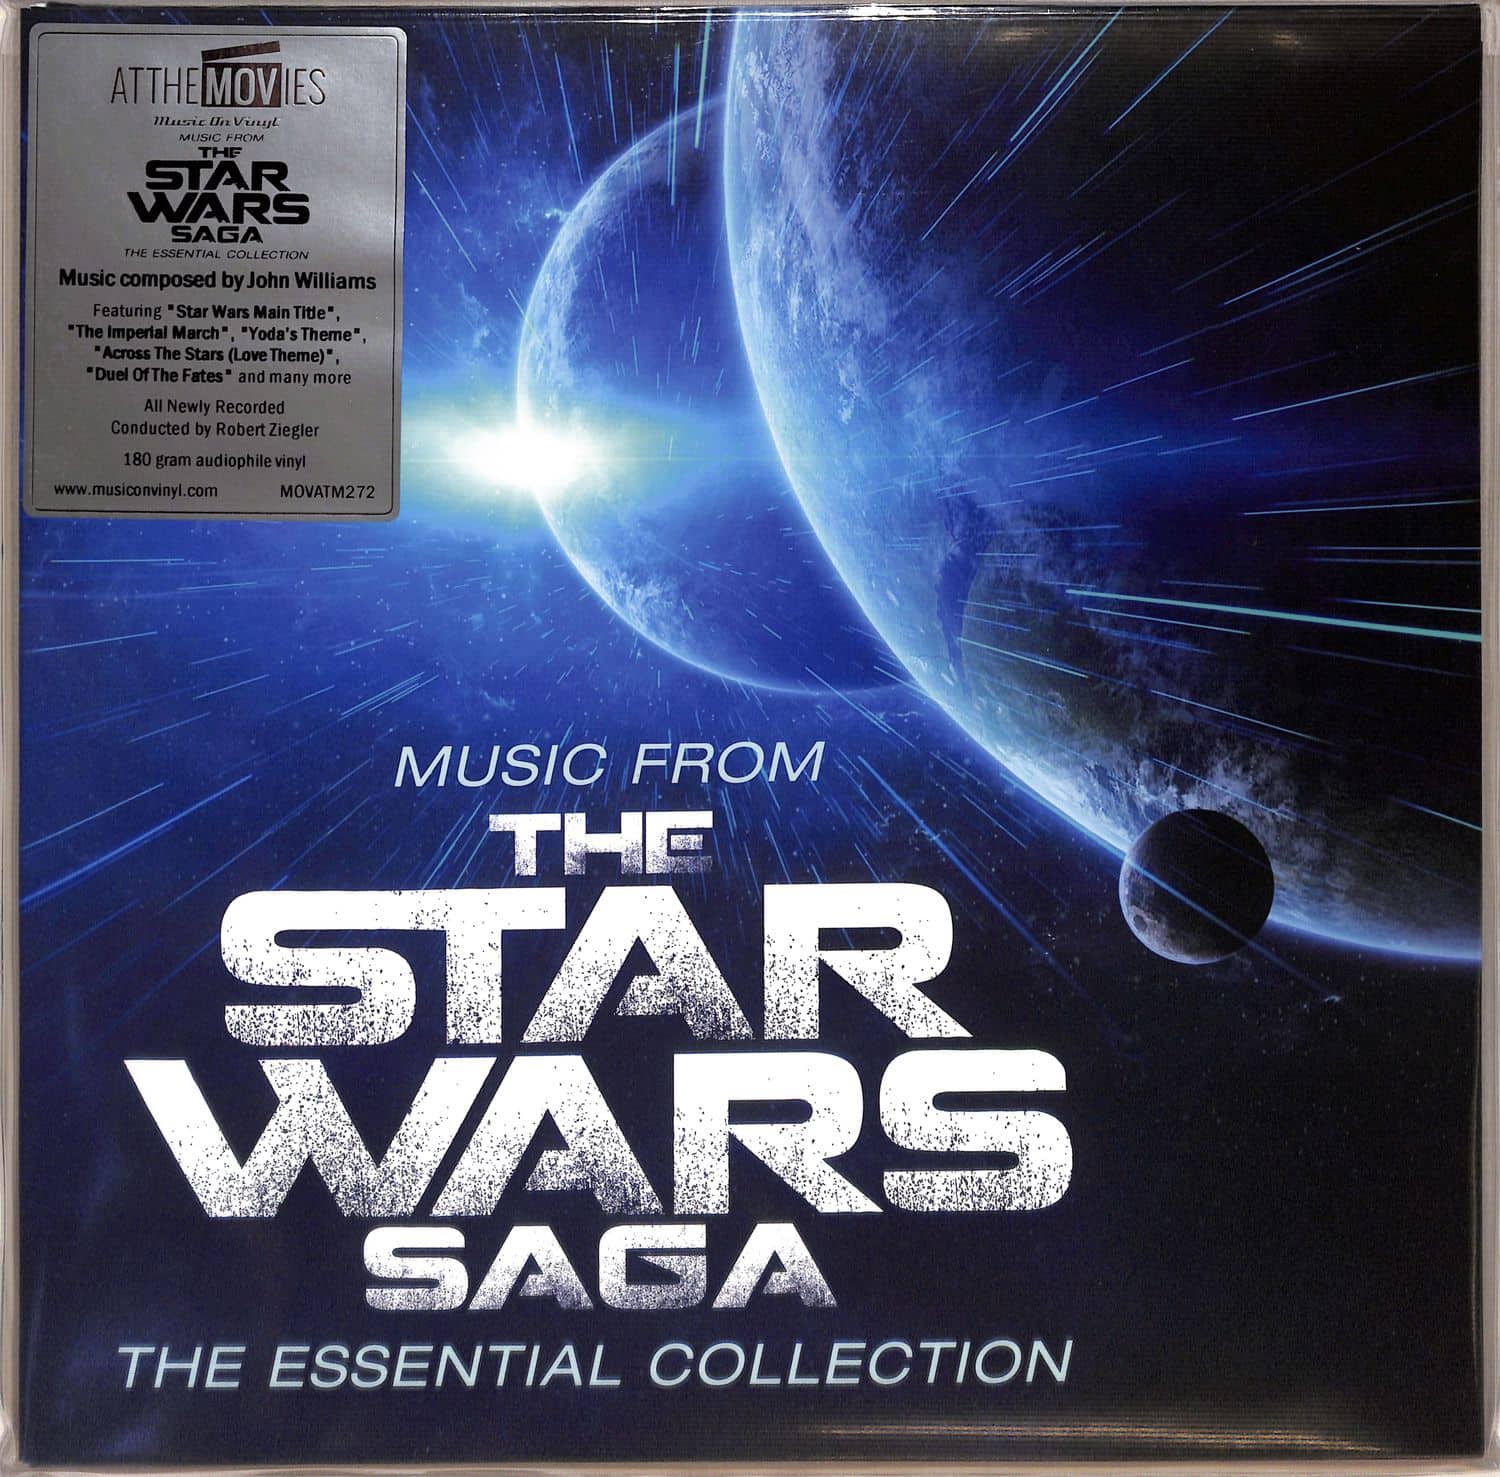 John Williams / Robert Ziegler - MUSIC FROM THE STAR WARS SAGA - THE ESSENTIAL COLLECTION 